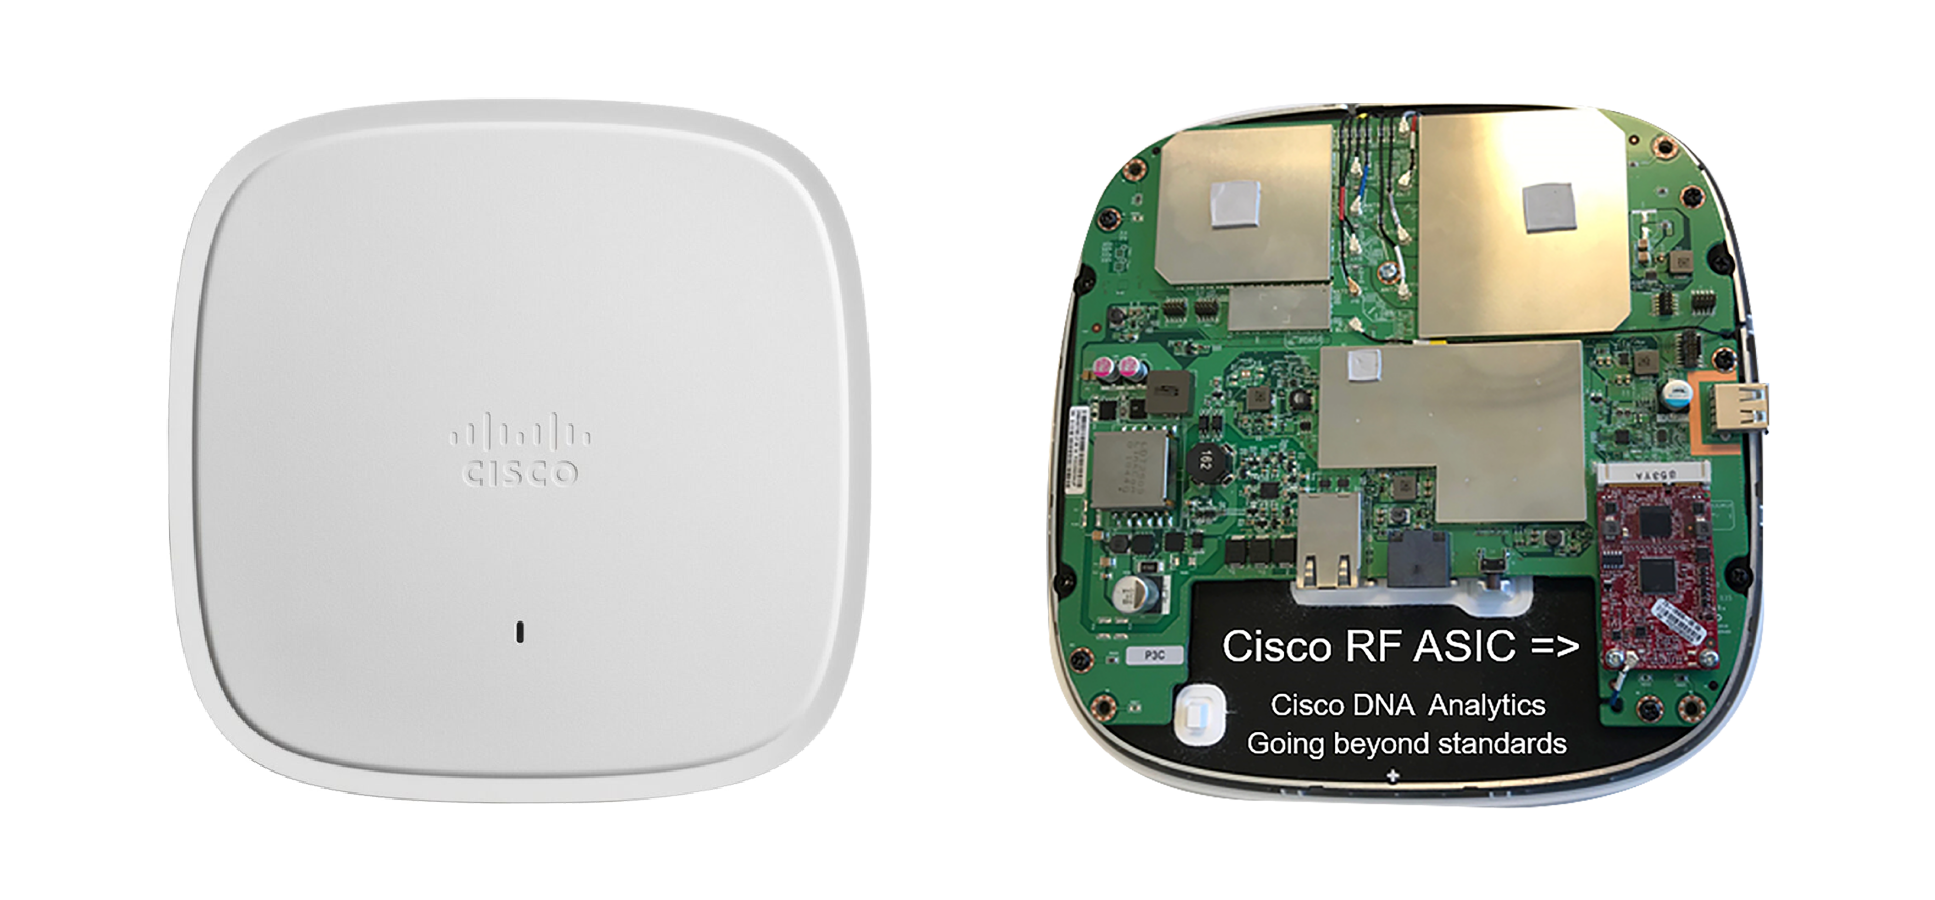 Catalyst 9120i with the Cisco RF ASIC chip